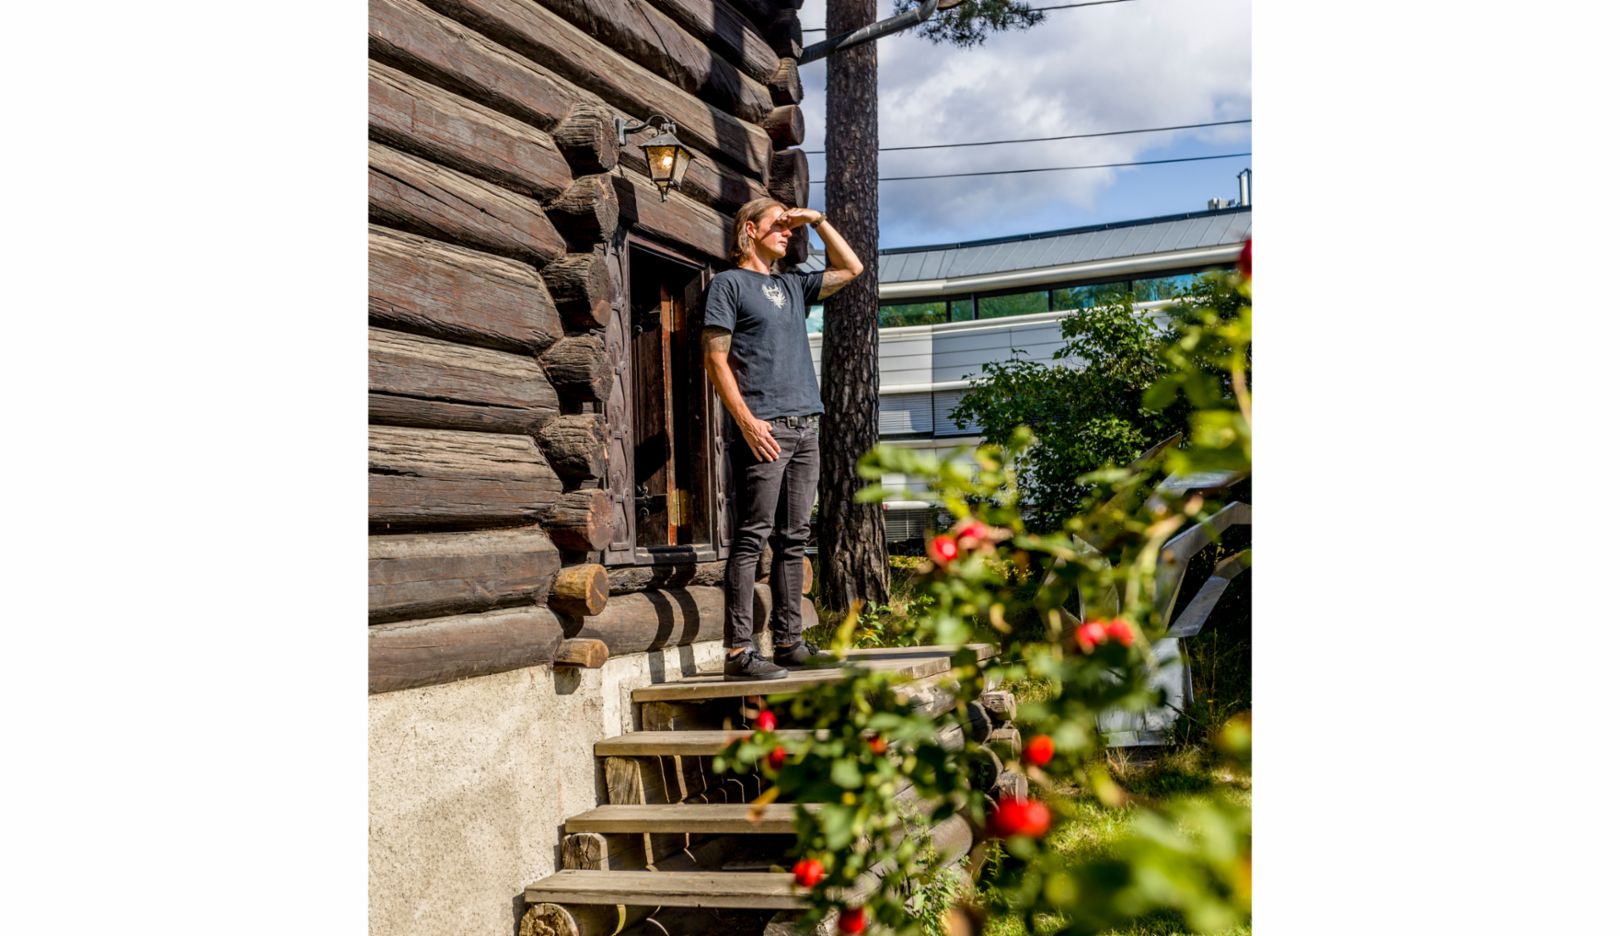 The old farmer’s cottage has it all: It hosts the high-tech recording studio in which Sigurd Wongraven is working on soundscapes for a special exhibition in Oslo’s Edvard Munch Museum. The Norwegian is known for being the front man of the black-metal band Satyricon.